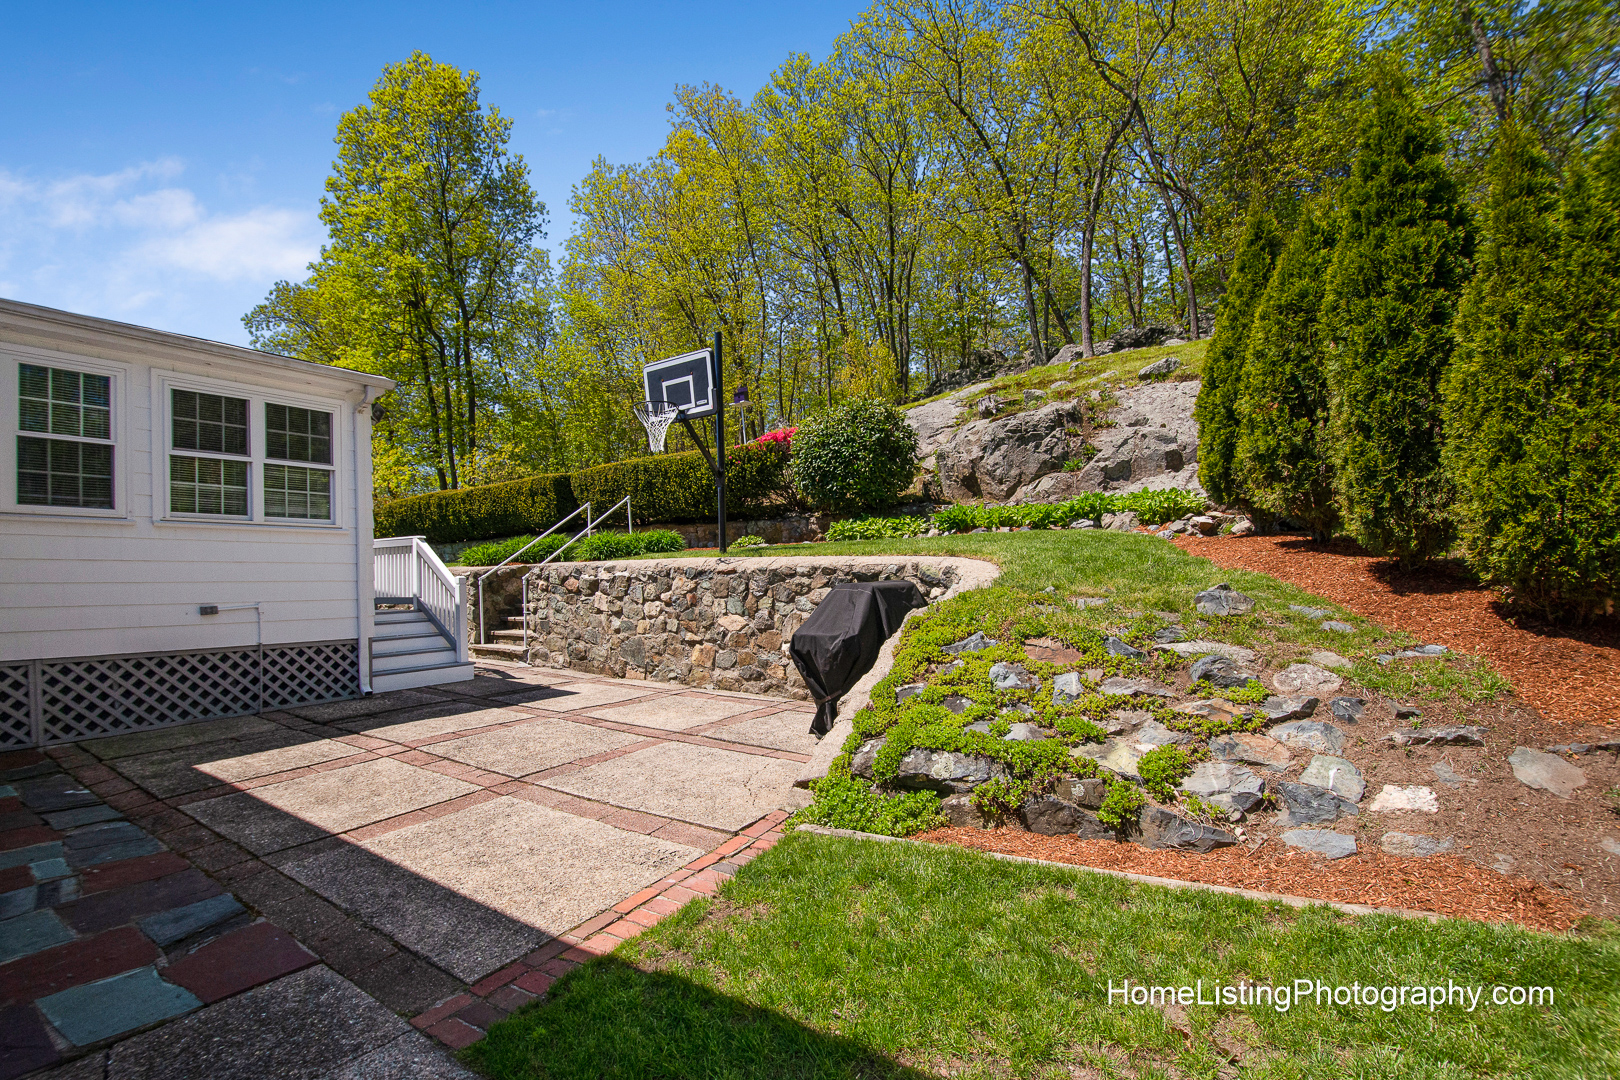 Thomas Adach - Stoneham MA professional real estate photographer - 508-655-2225 Home Listing Photography